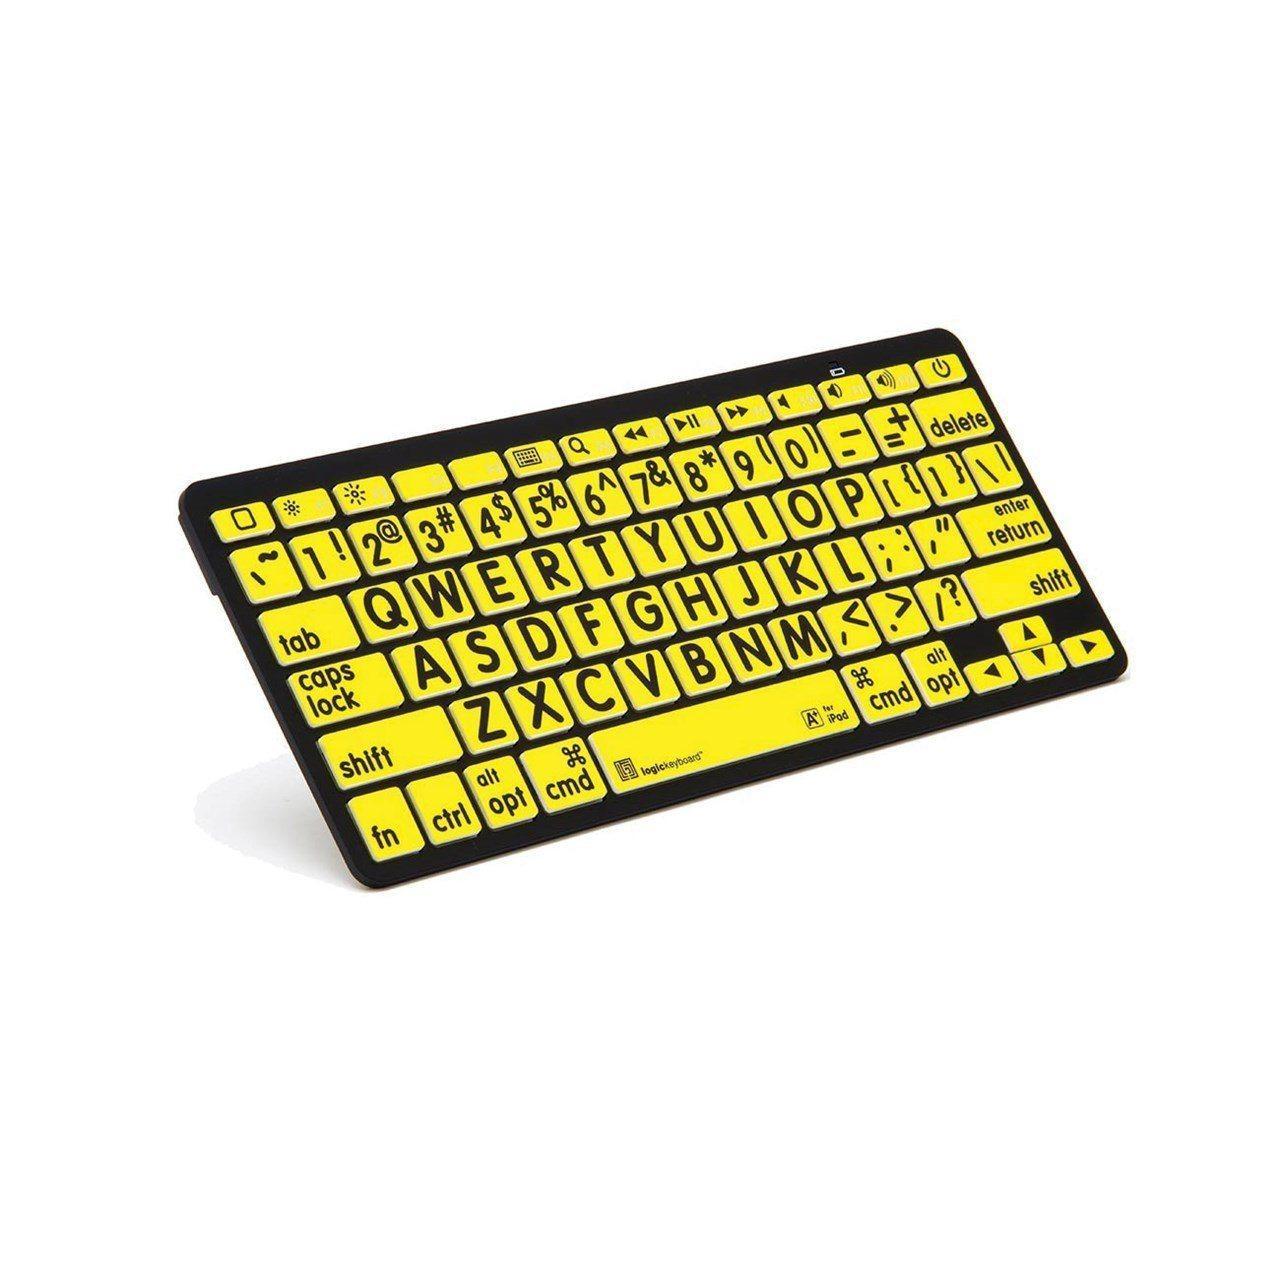 Apple Large Print Mini-Bluetooth Keyboard - The Low Vision Store